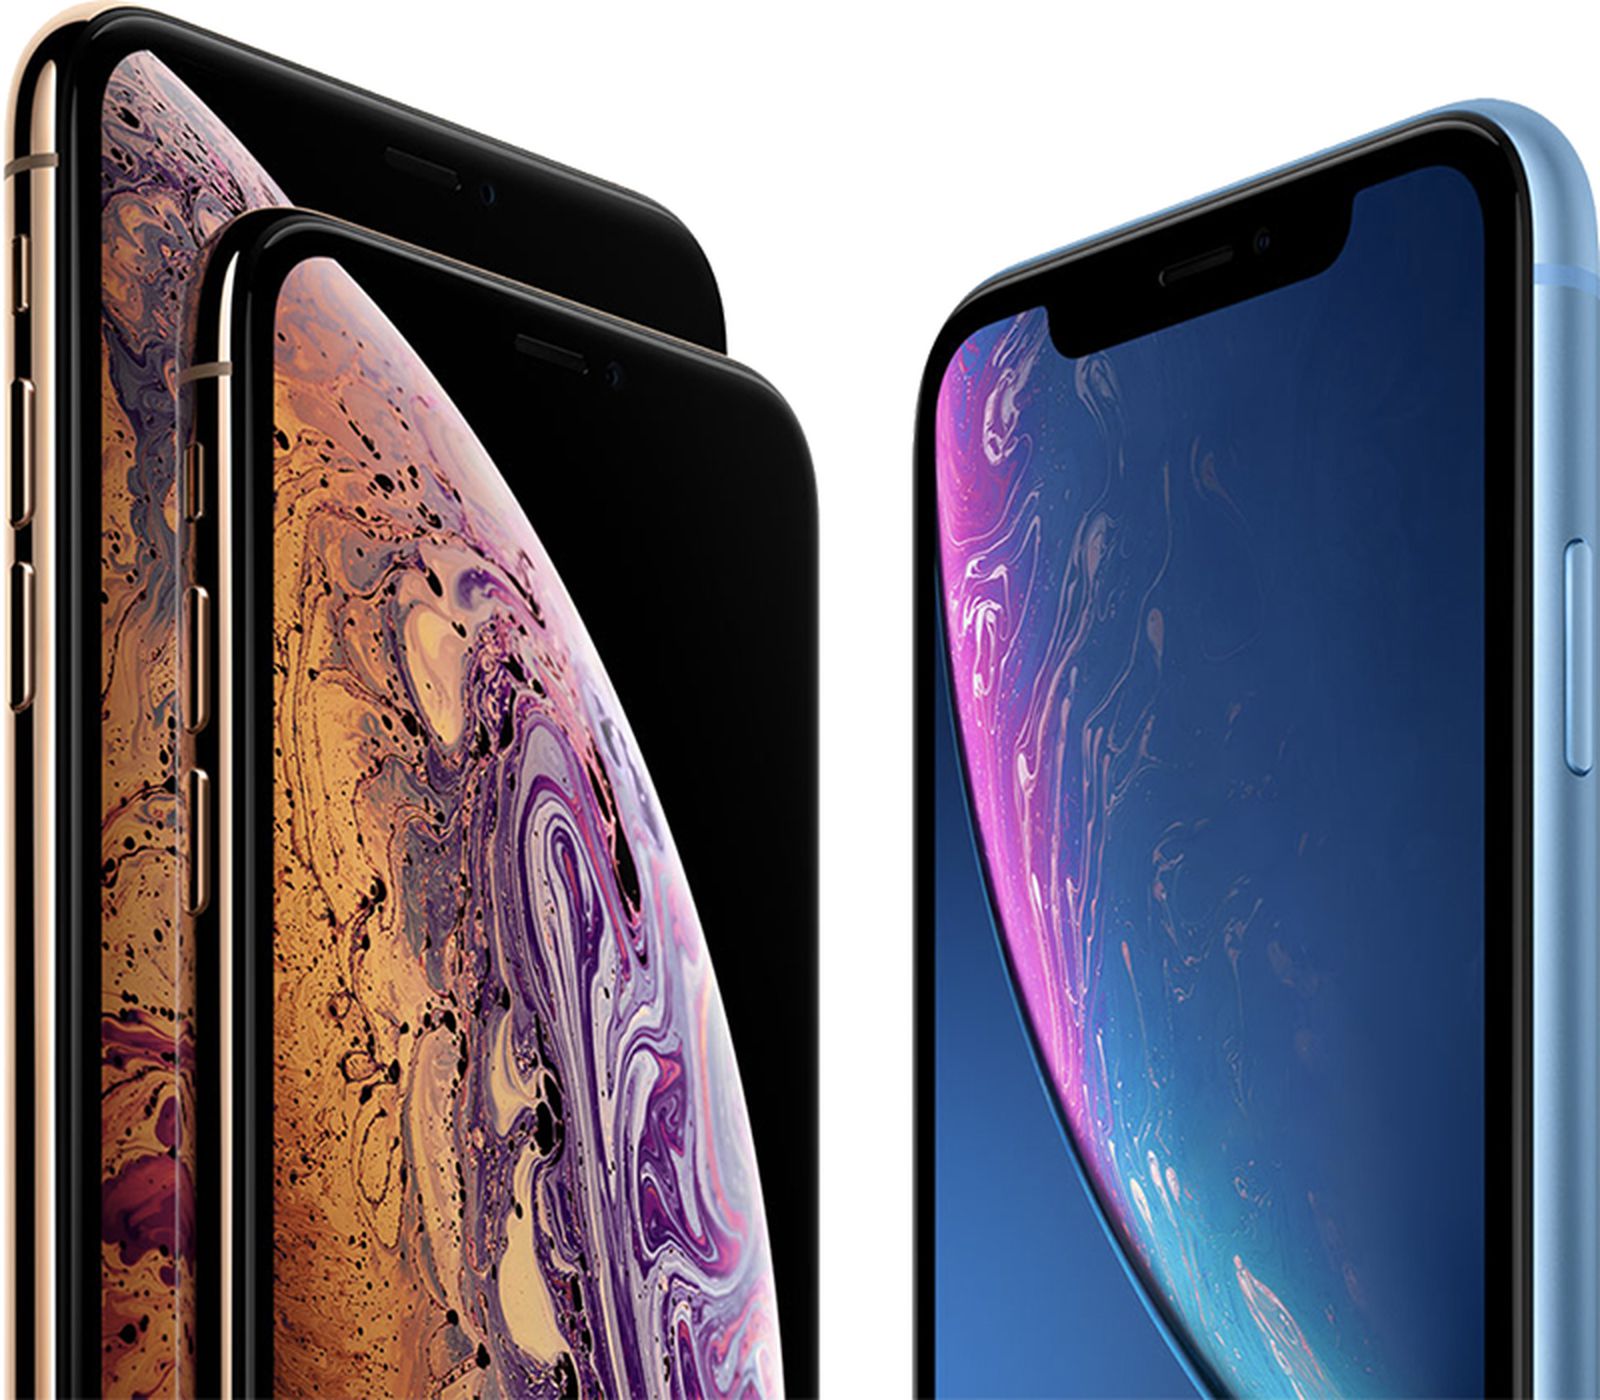 iphone-xs-iphone-xs-max-and-iphone-xr-battery-and-ram-specs-revealed